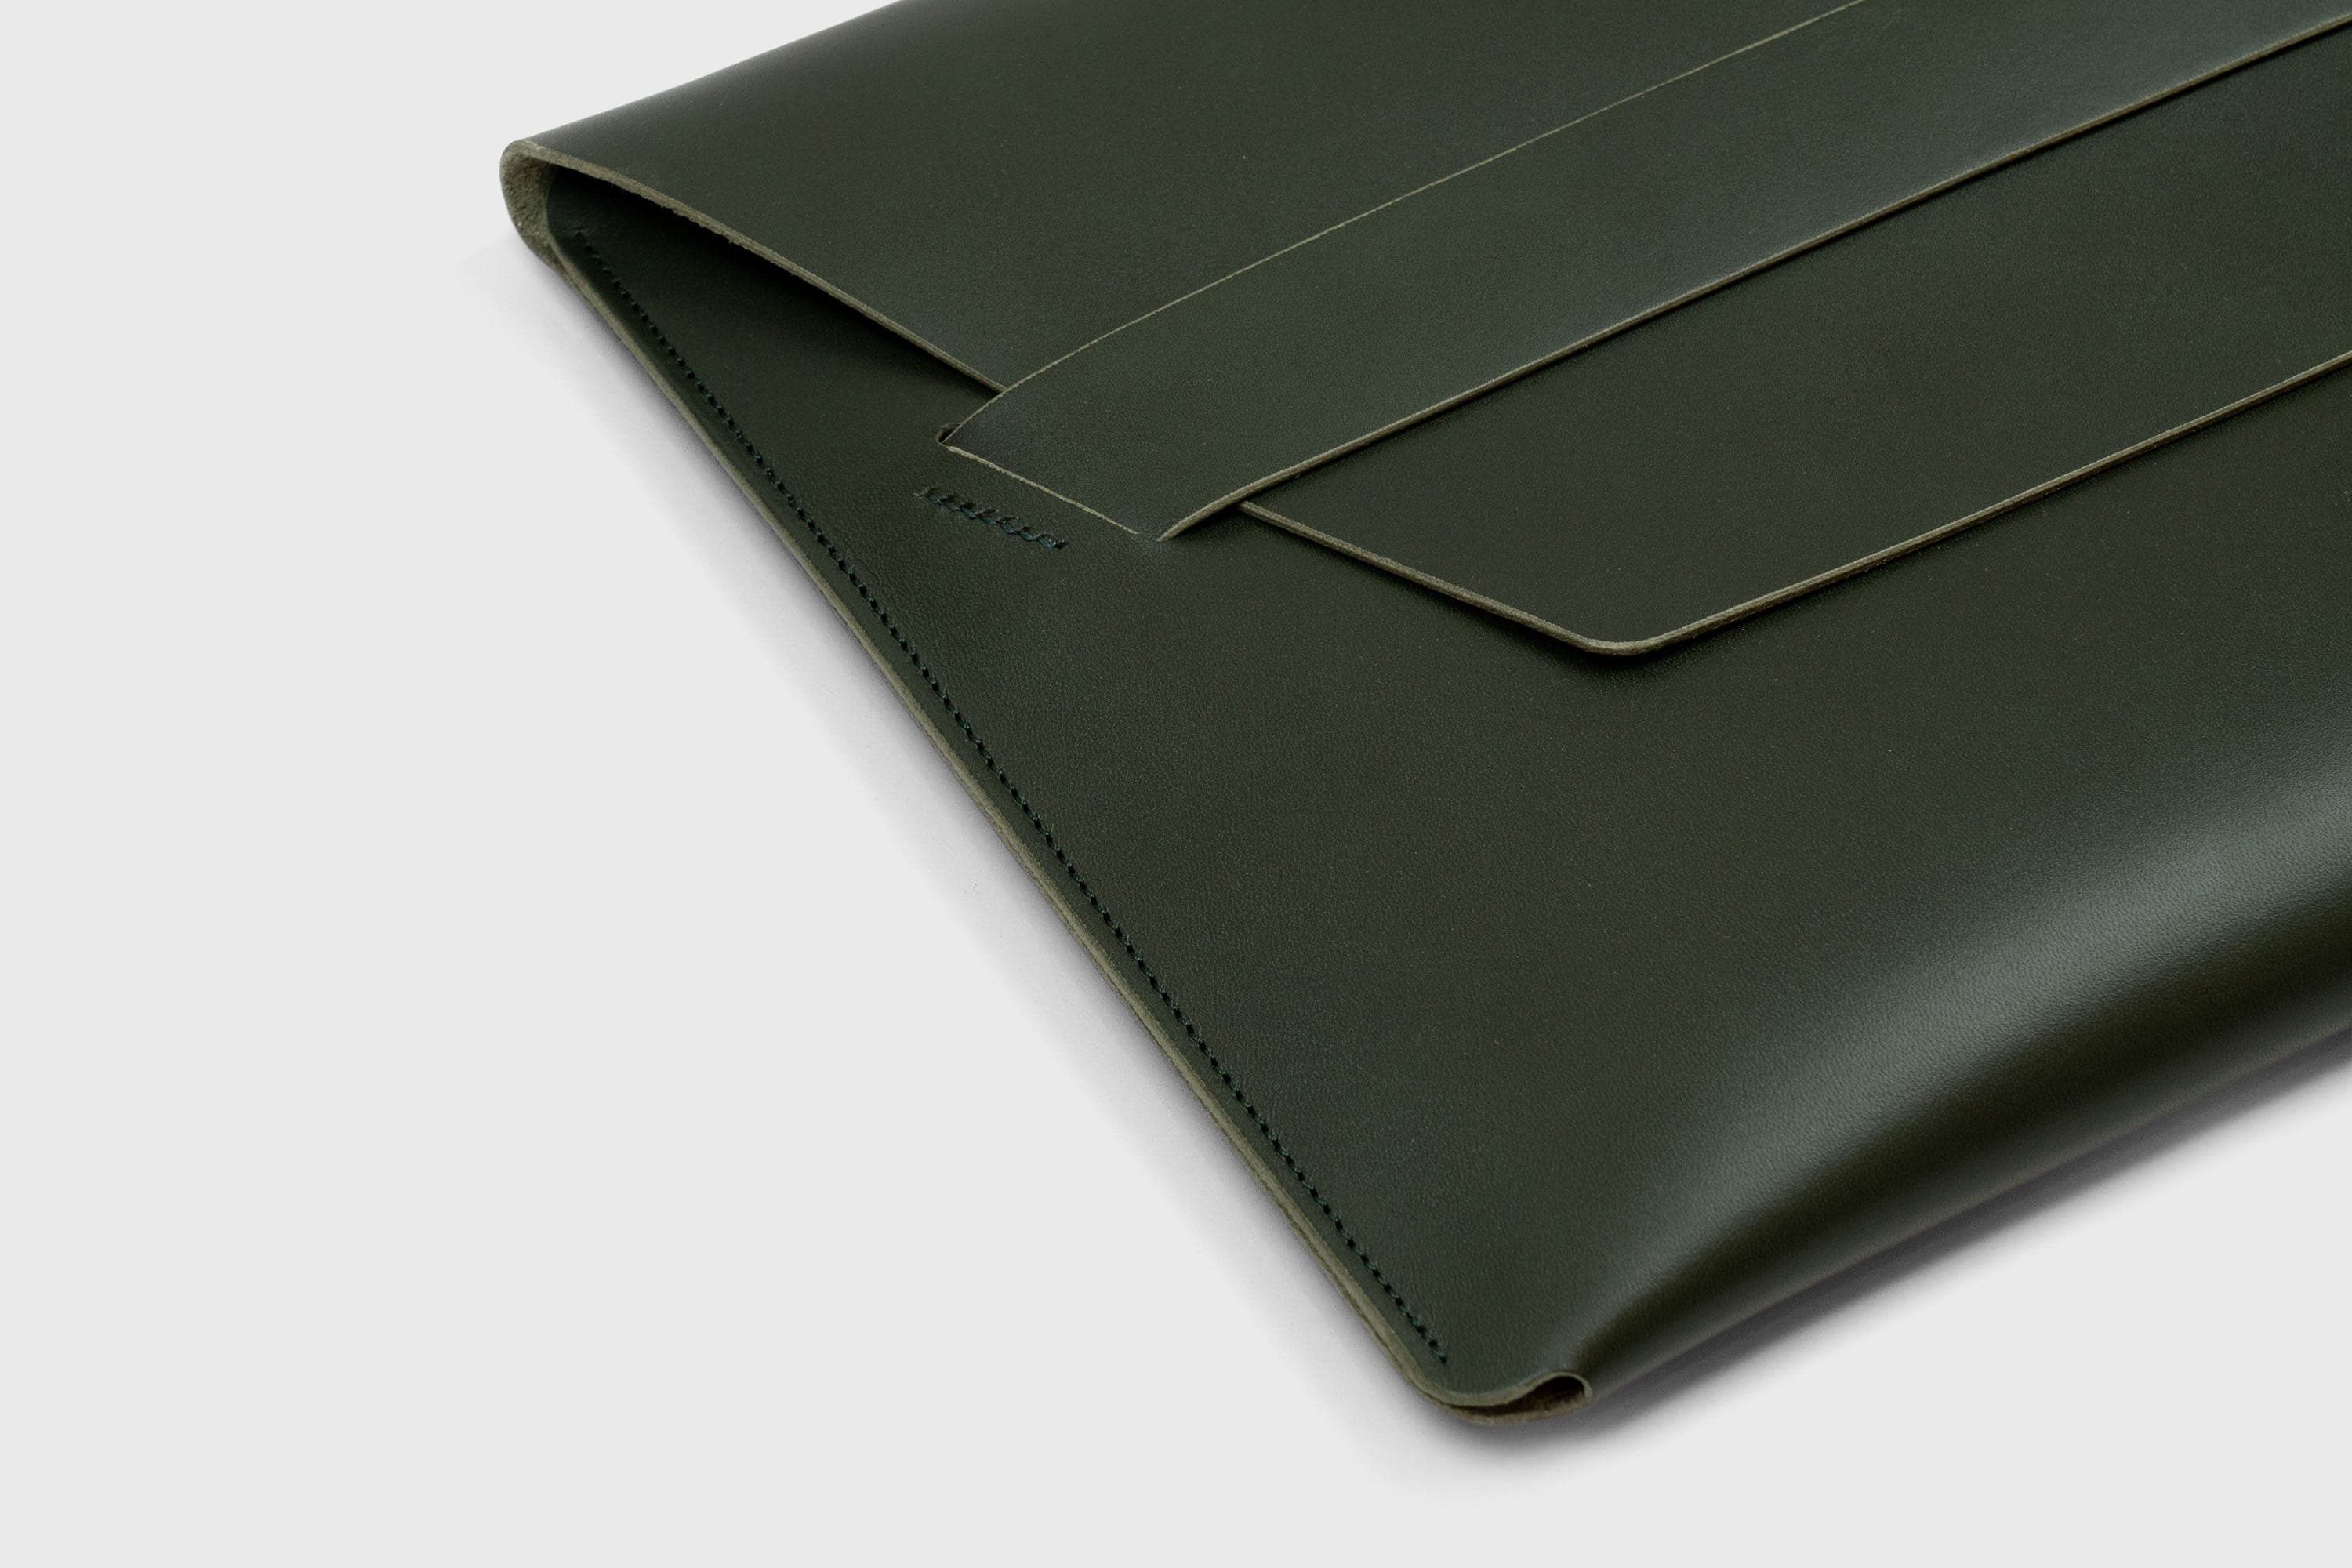 MacBook Sleeve 16 Inch Leather Dark Olive Green Handcrafted Vegetable Tanned Leather Exclusive Quality Design By Manuel Dreesmann Atelier Madre Barcelona Spain